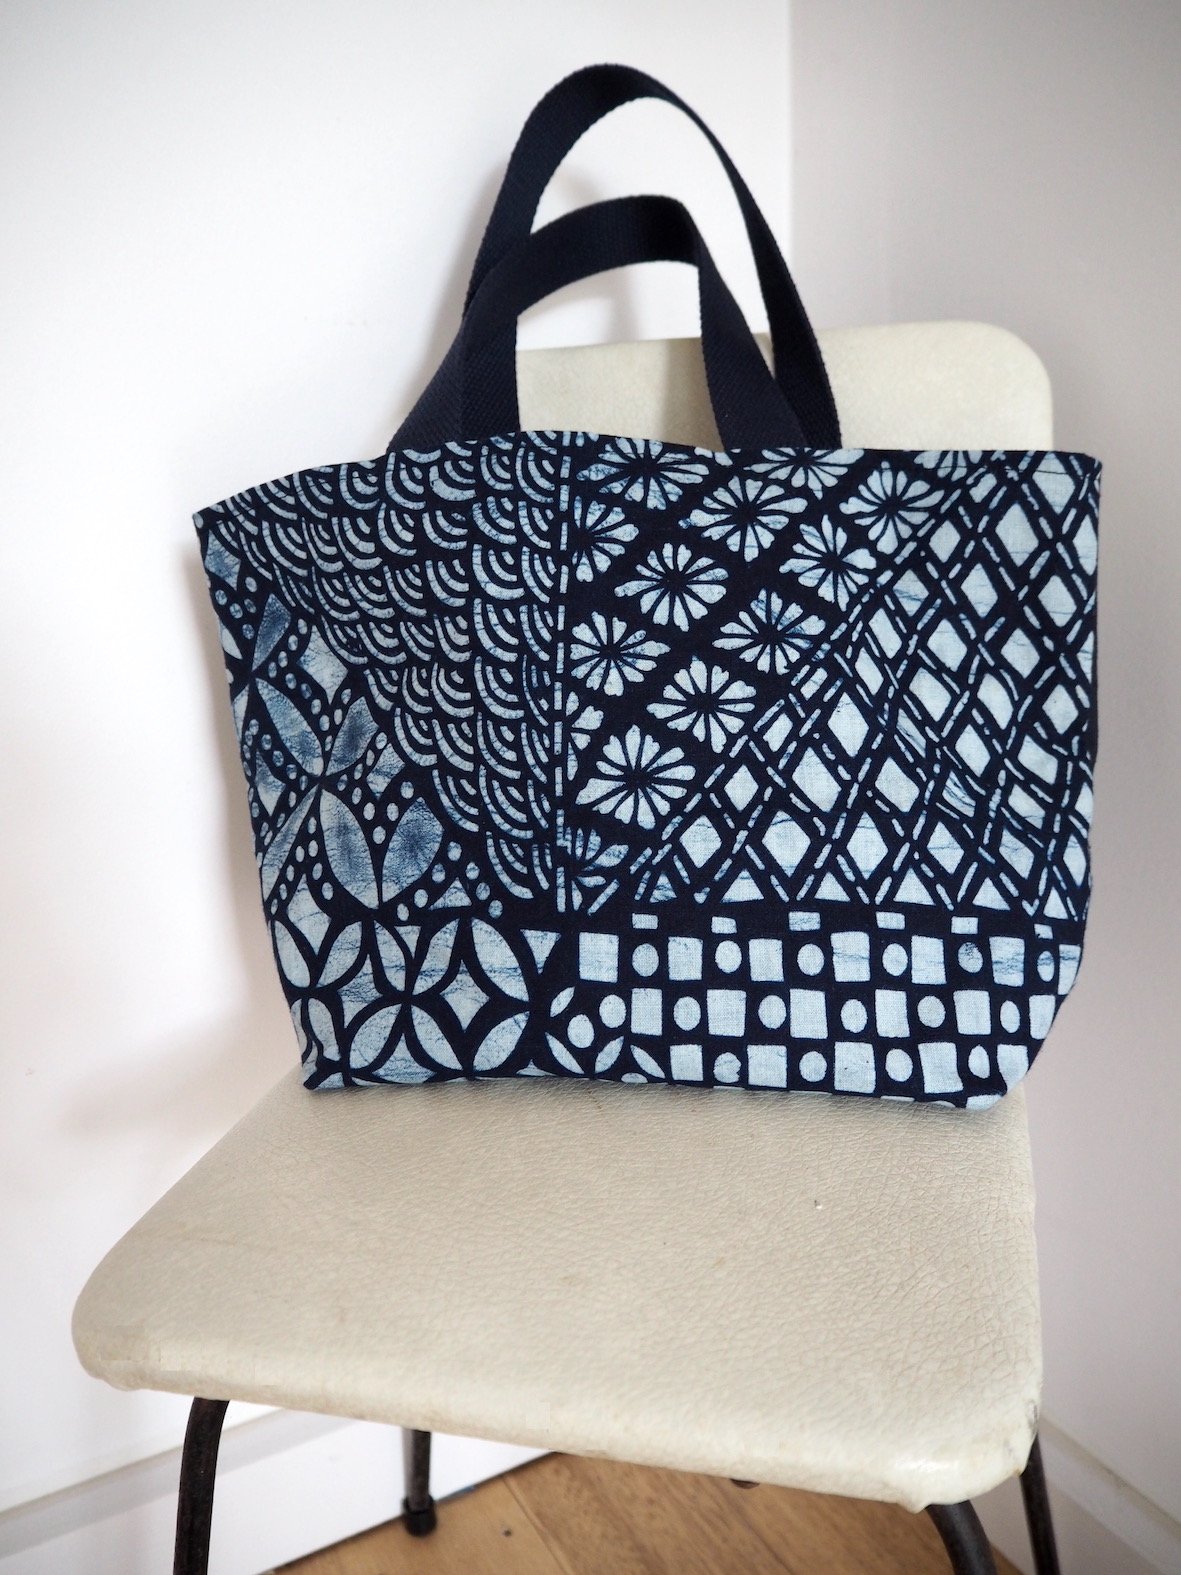 Liz Taverner bags — gallery of small things